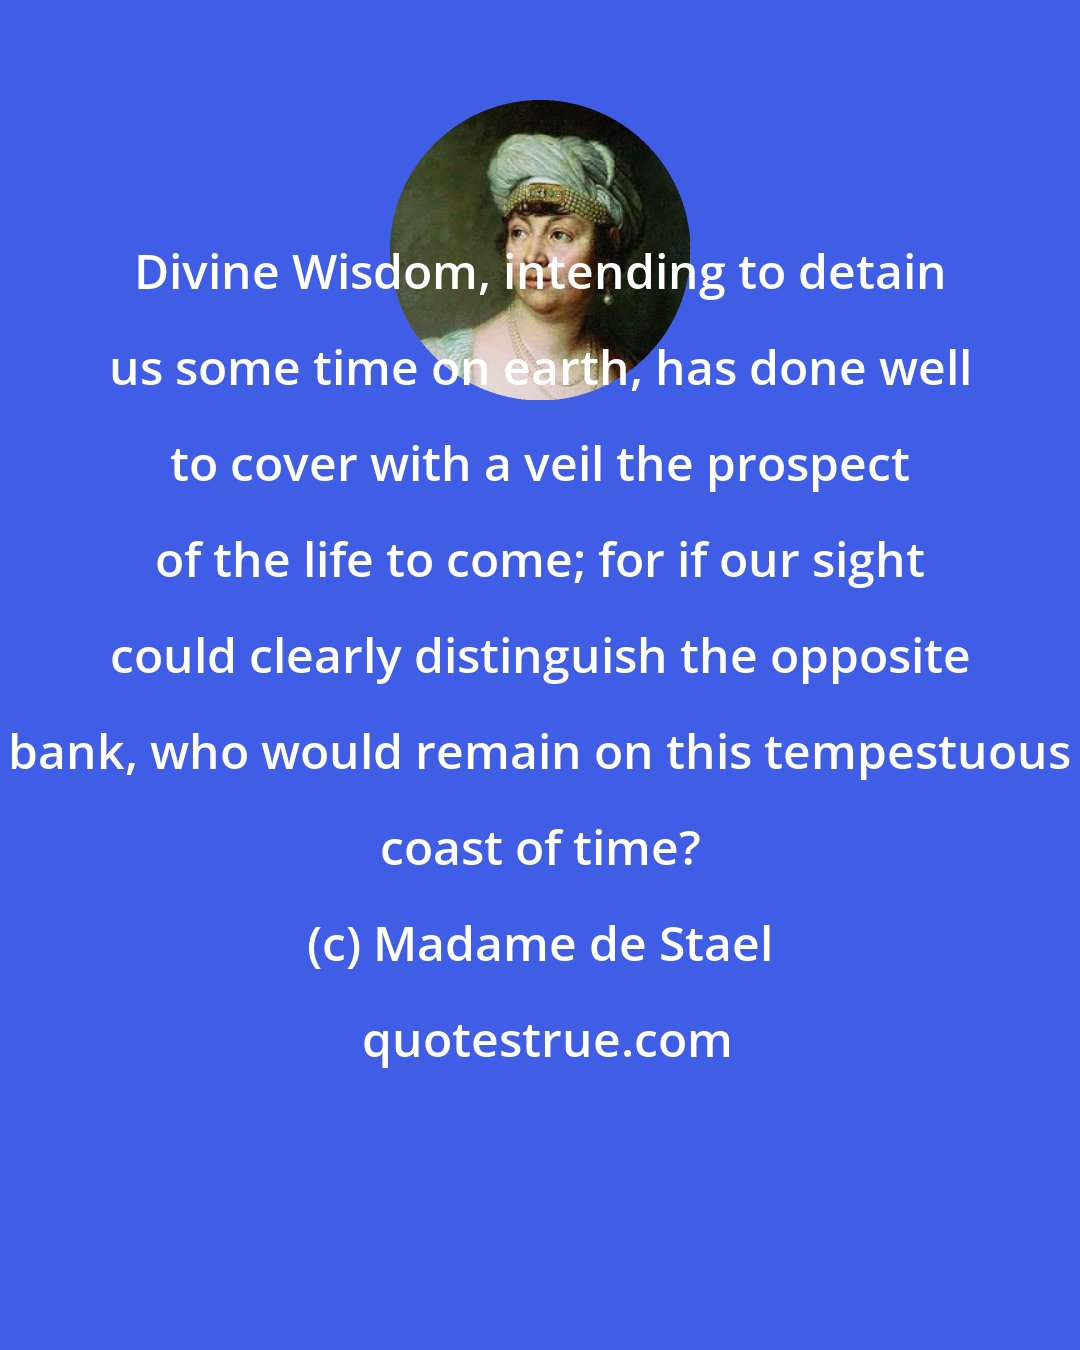 Madame de Stael: Divine Wisdom, intending to detain us some time on earth, has done well to cover with a veil the prospect of the life to come; for if our sight could clearly distinguish the opposite bank, who would remain on this tempestuous coast of time?